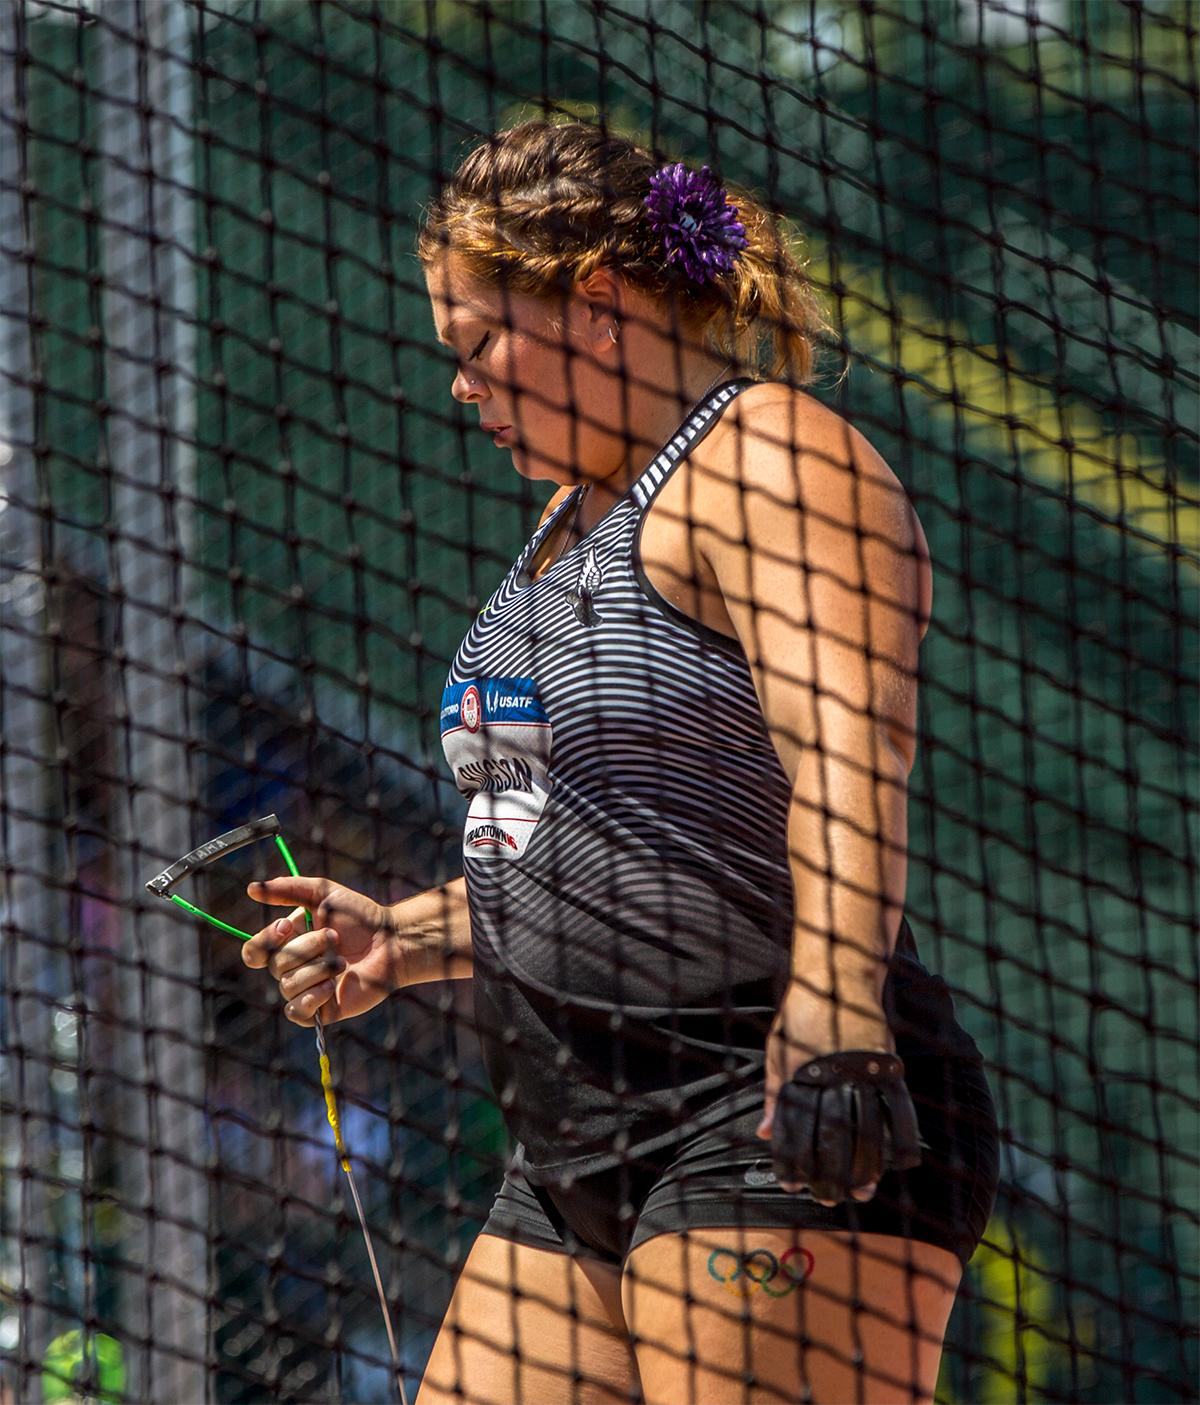 Photos Hammer Throwers Launch Their Way To The Olympics